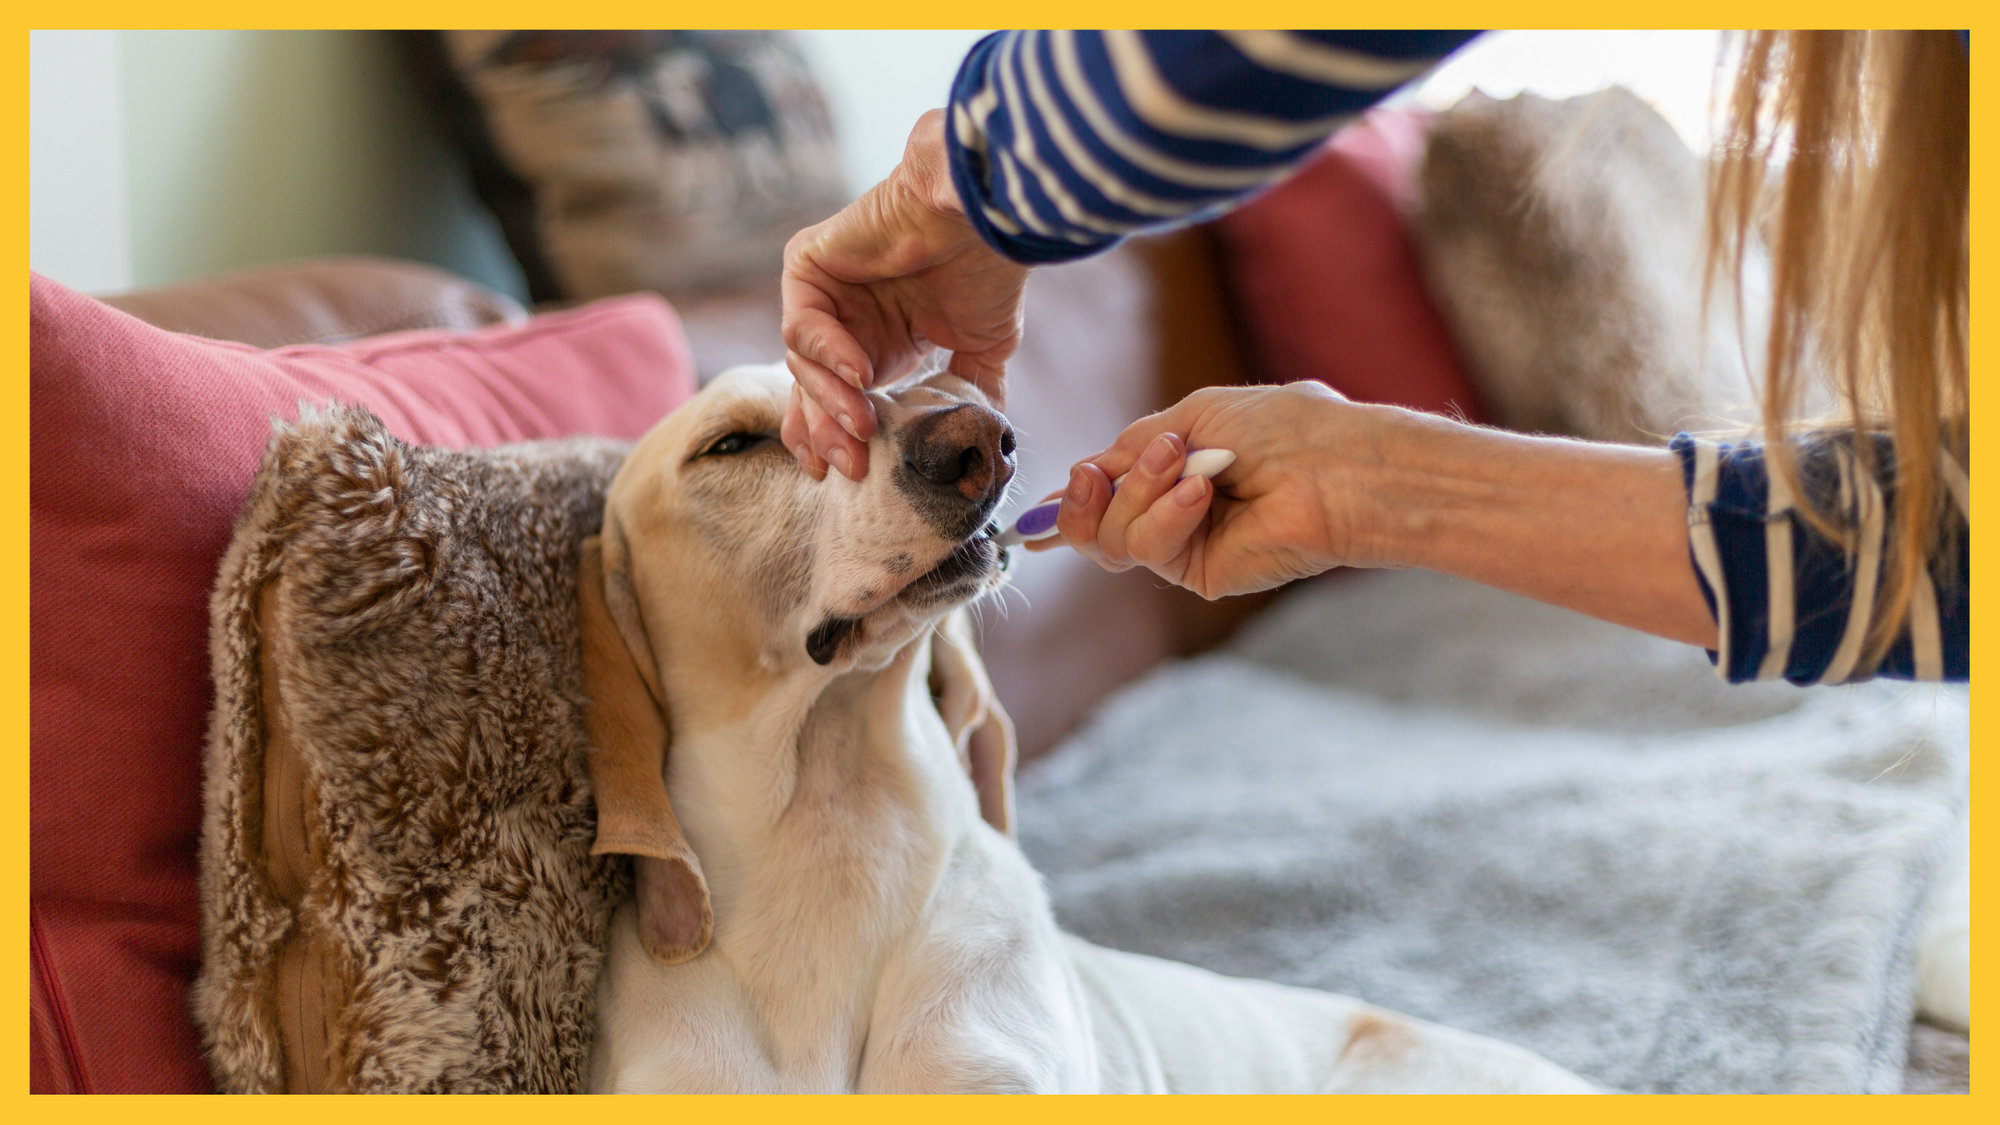 Some friendly reminders for your dog’s oral hygiene